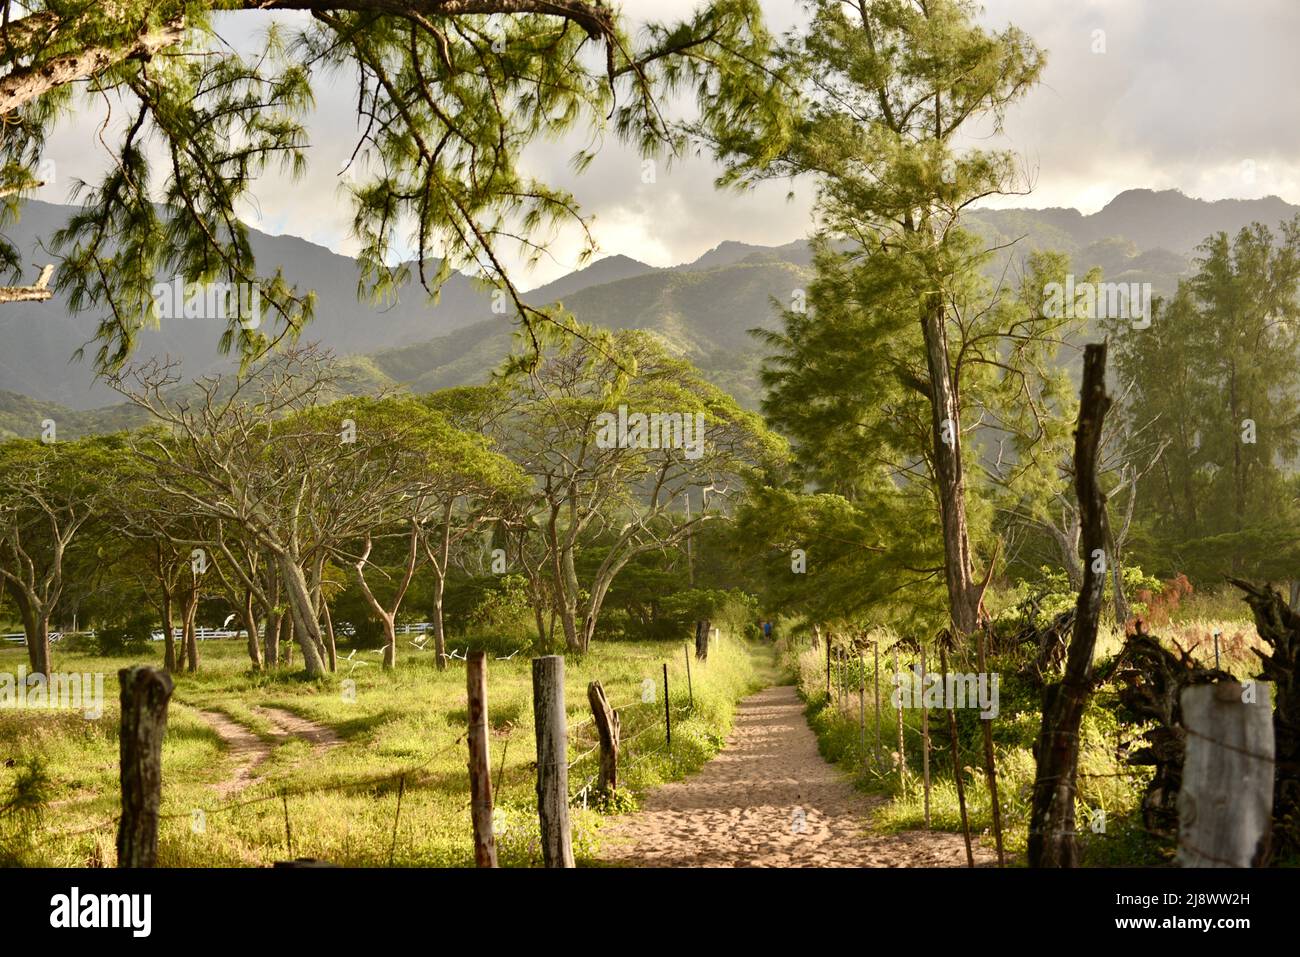 Sandy pathway lined by fenced-in ranch pasture, Pahole Natural Area Reserve mountains in distance, Mokuleia, Hawaii, USA Stock Photo